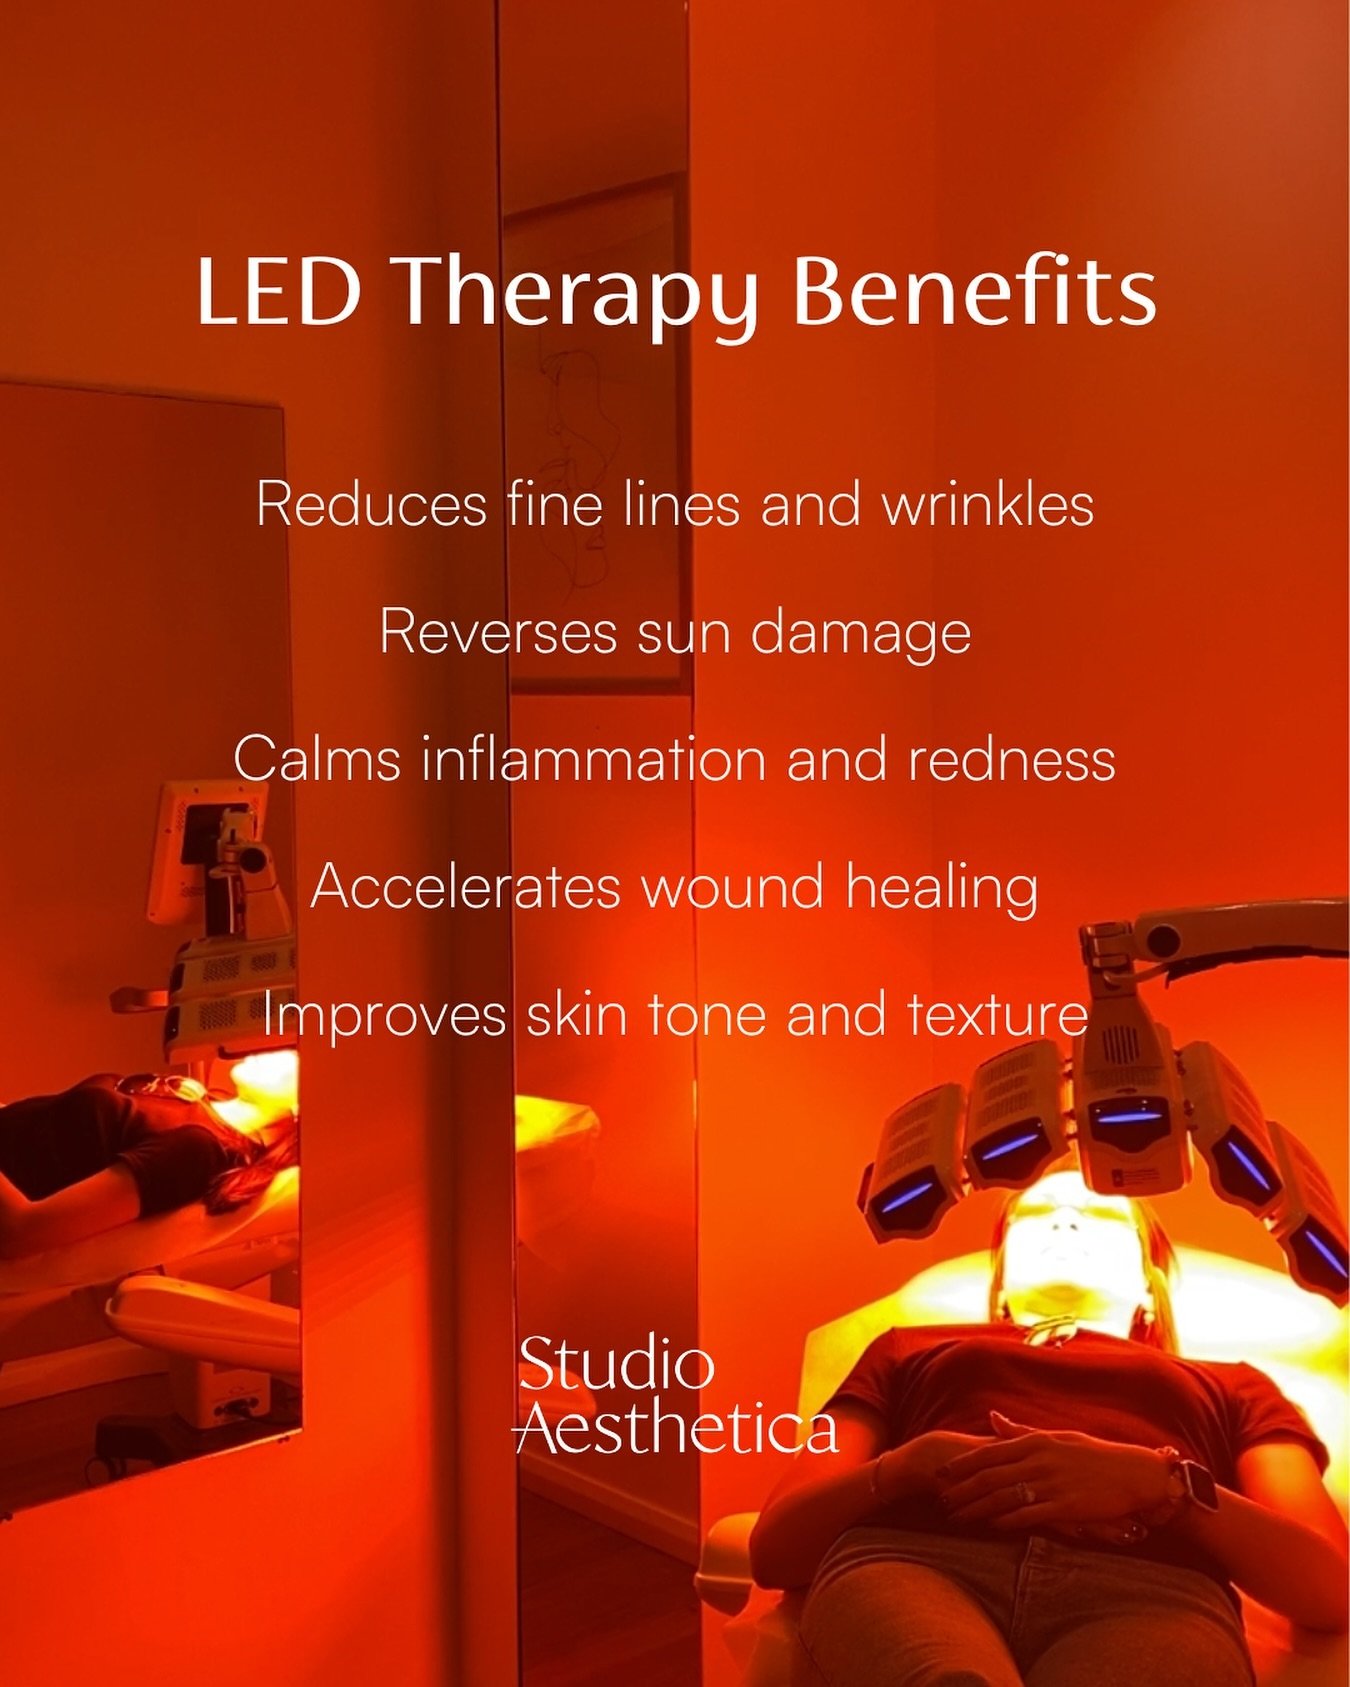 LED Therapy has been a buzzword in the industry, so what does it actually do?

This innovative treatment activates your body&rsquo;s cellular powerhouses, mitochondria, to boost energy production and supercharge your skin&rsquo;s natural rejuvenation